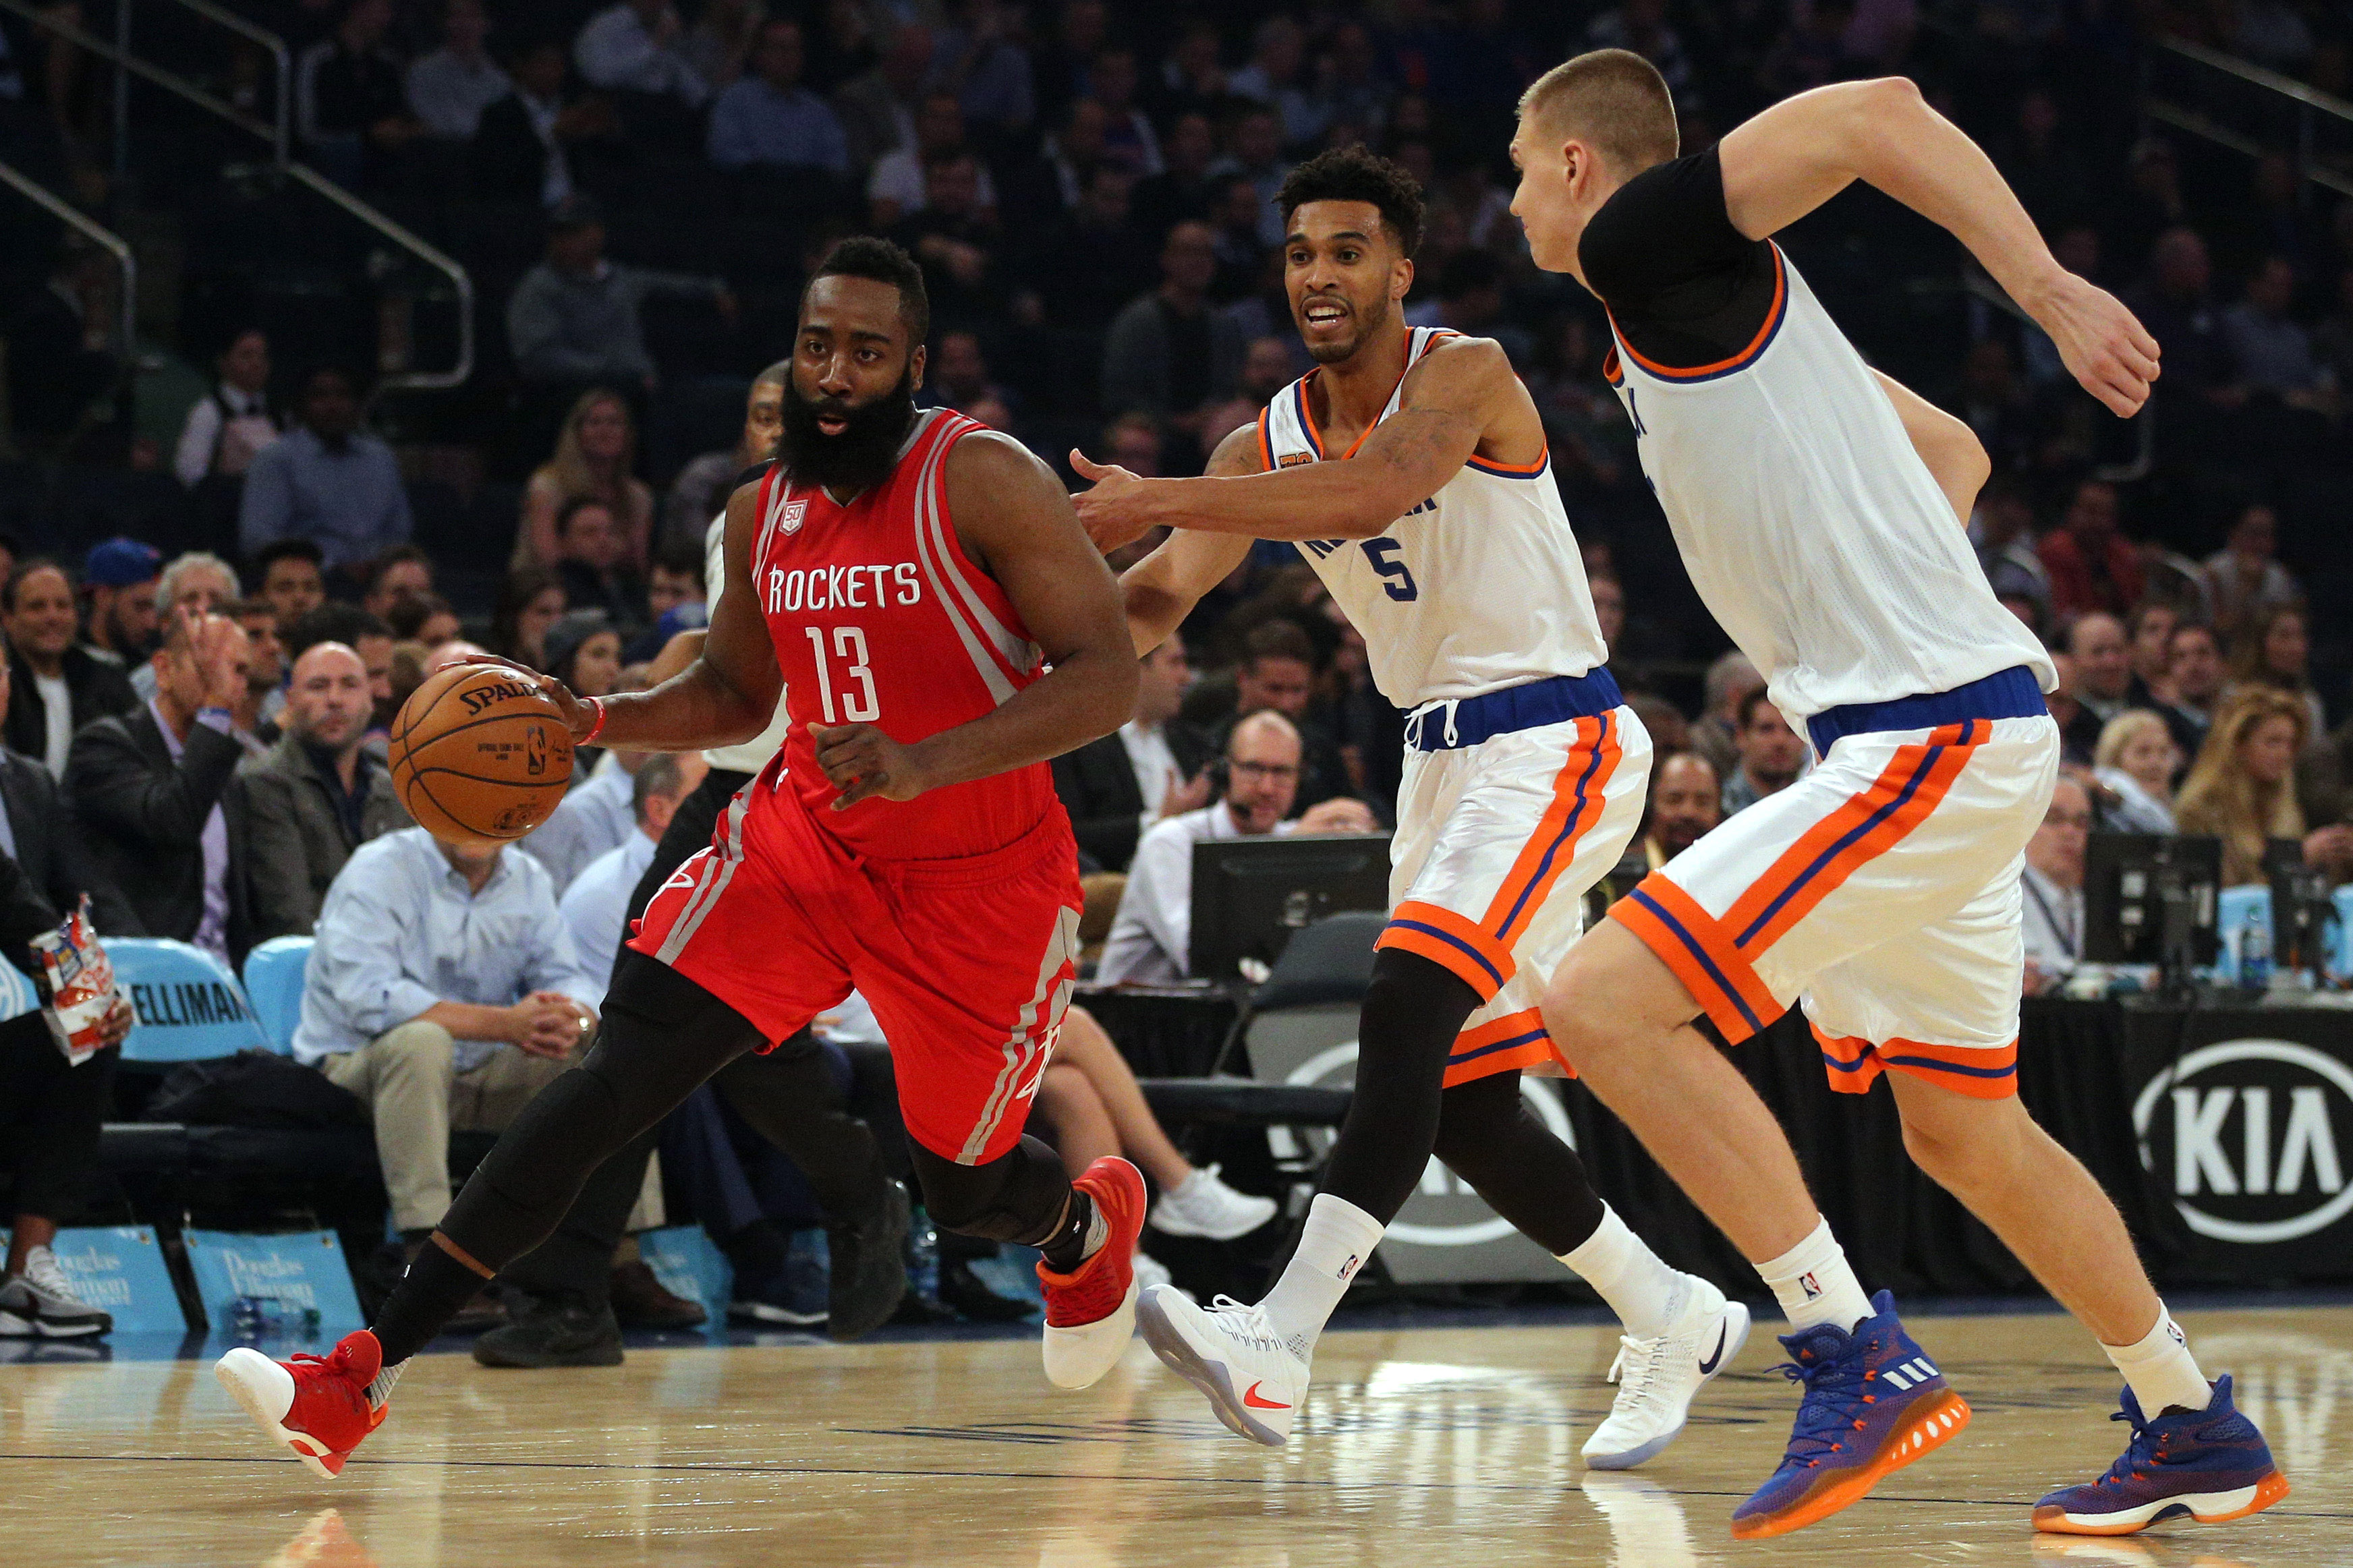 Knicks becoming frustrated after 118-99 loss to Rockets 